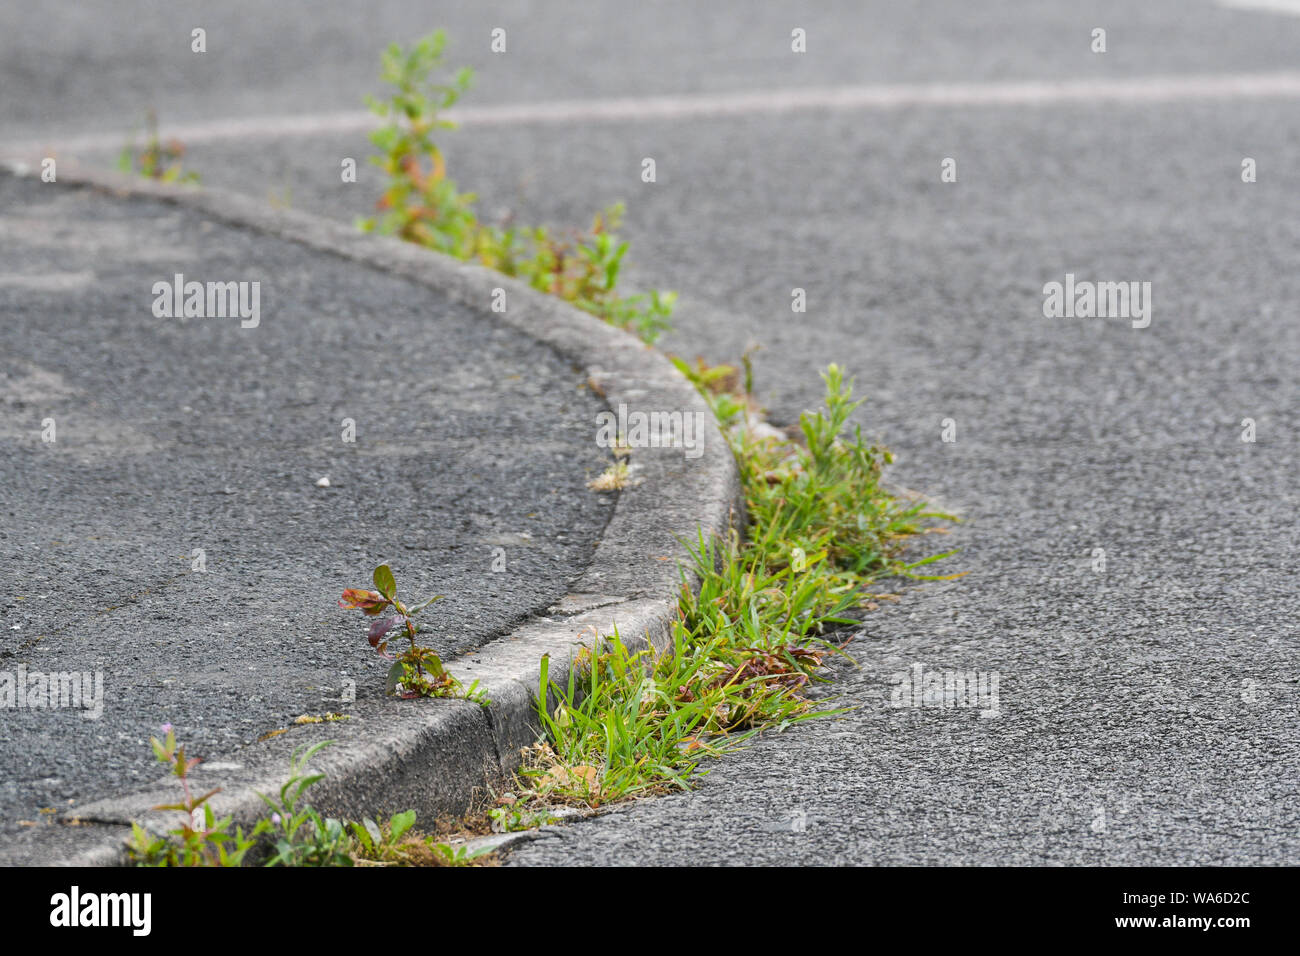 weeds growing in the gutter of the road Stock Photo